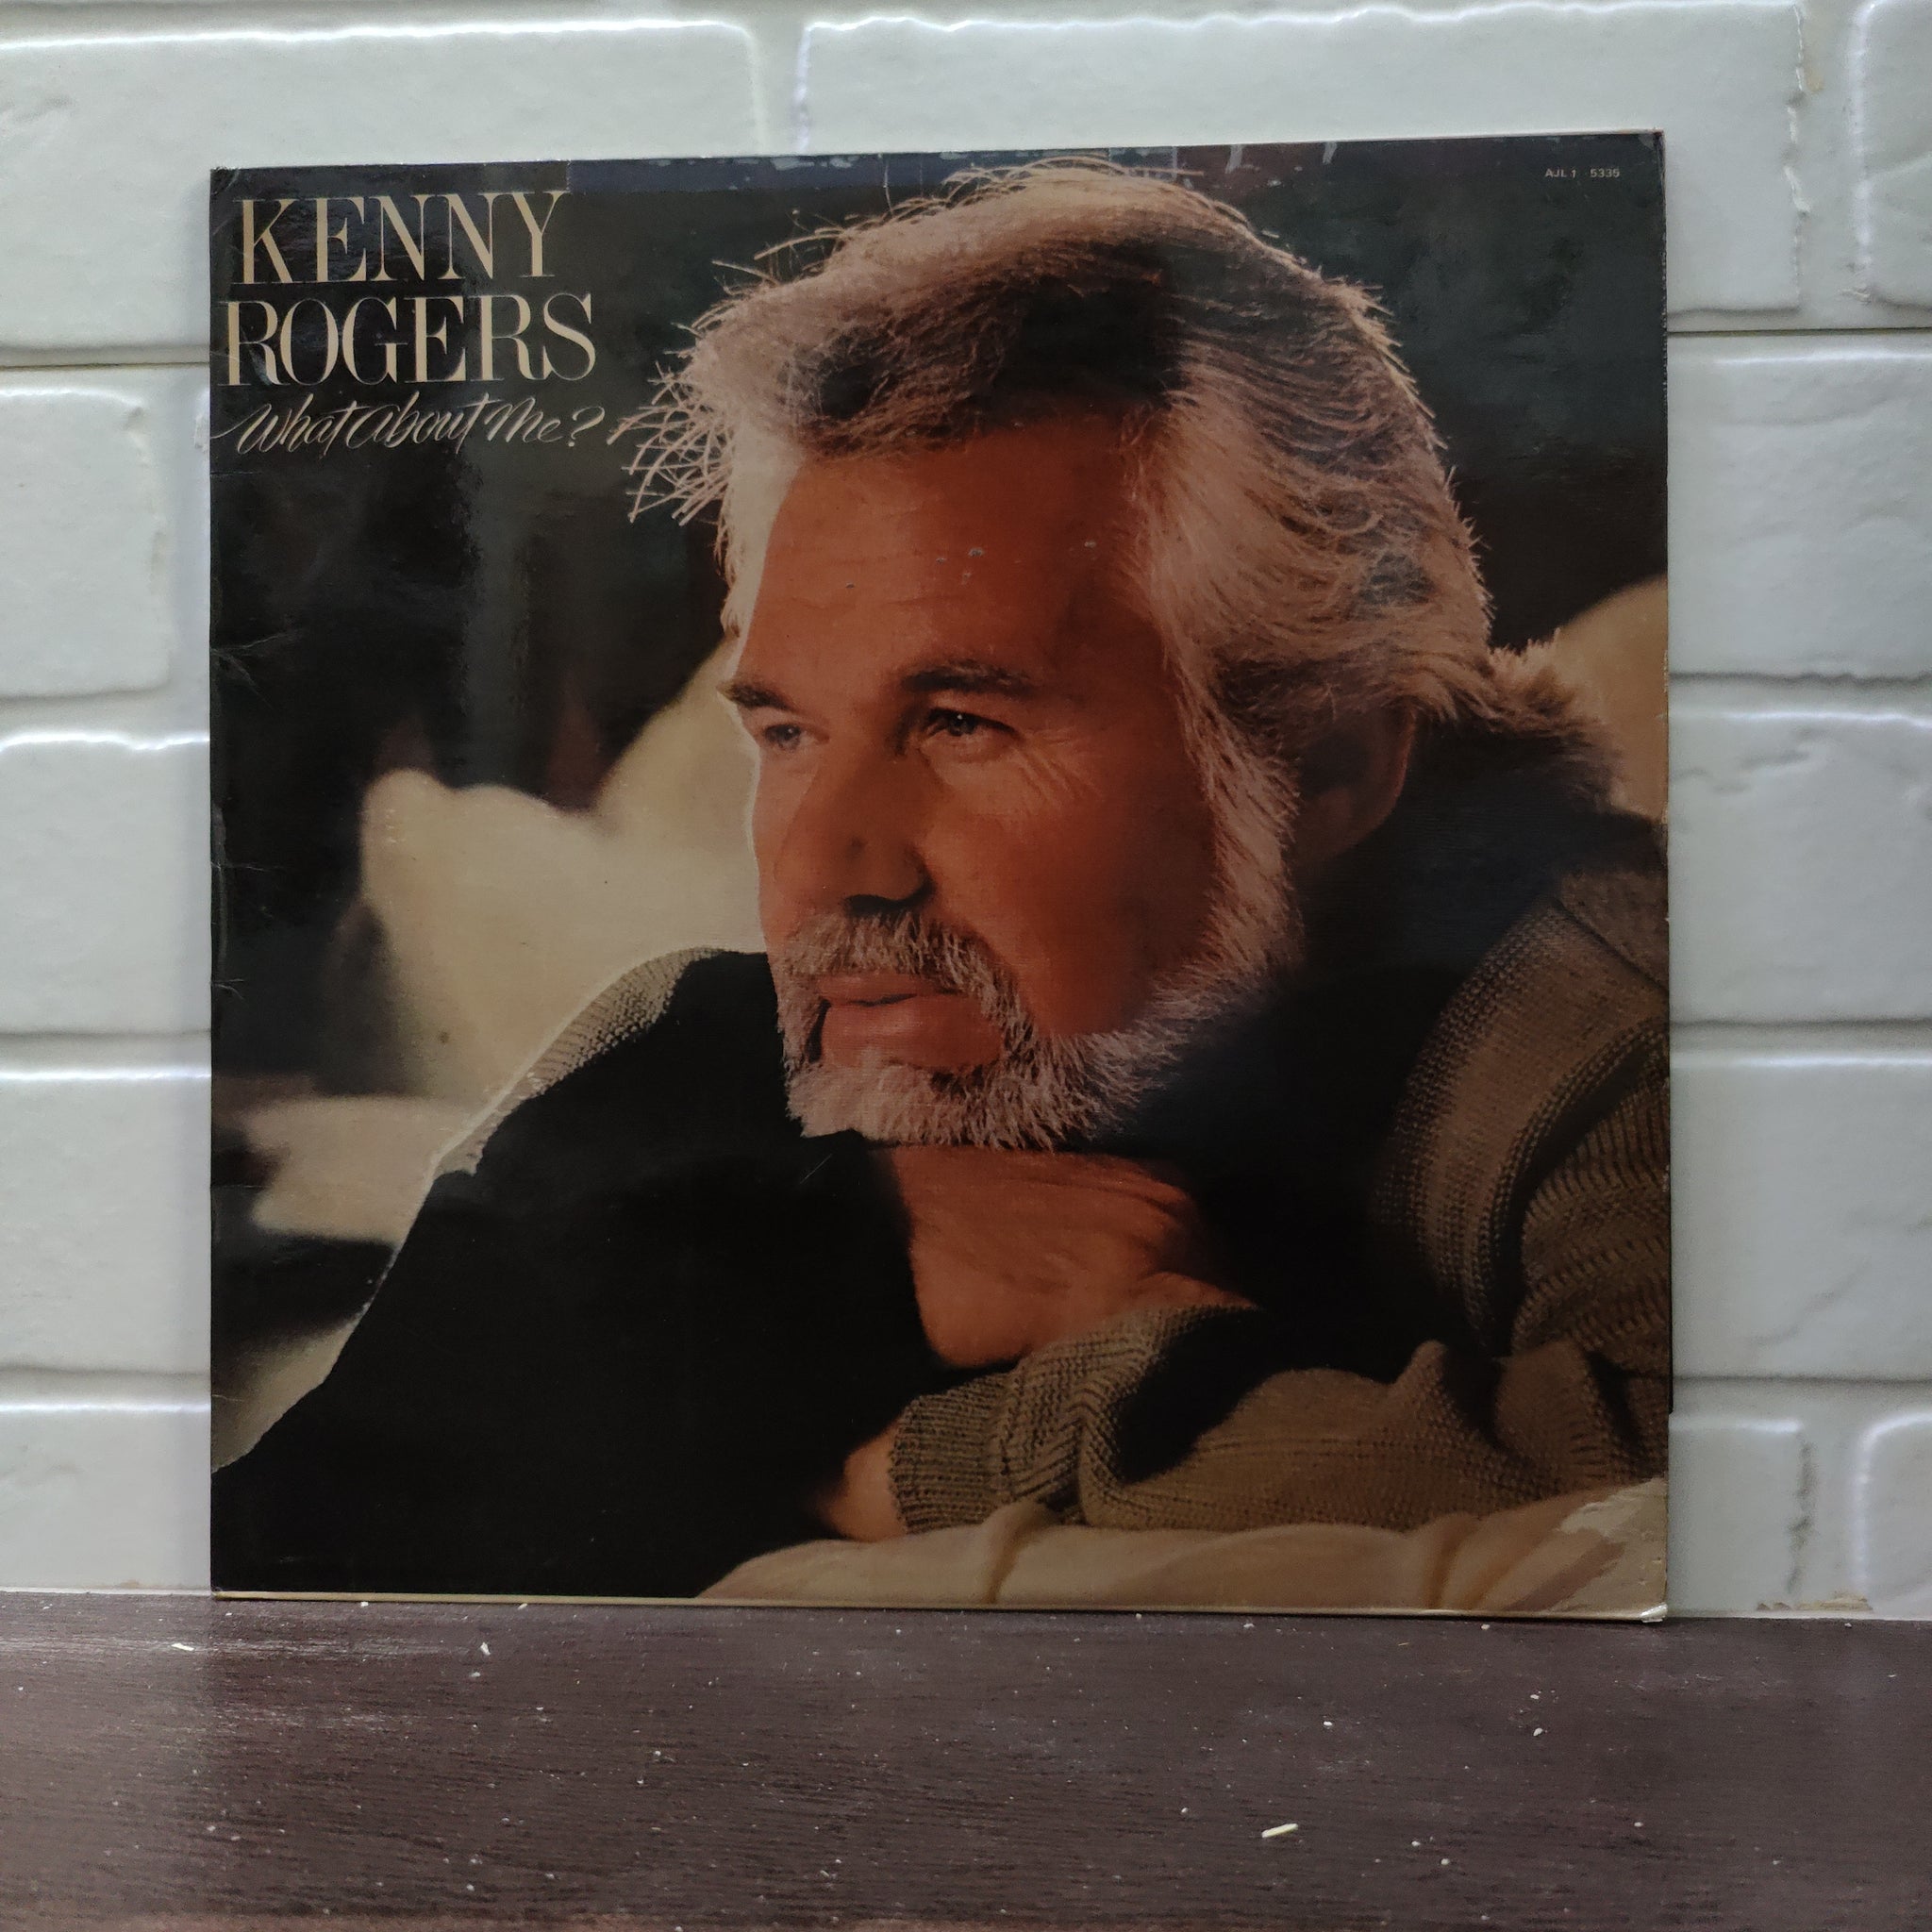 What About Me? By Kenny Rogers